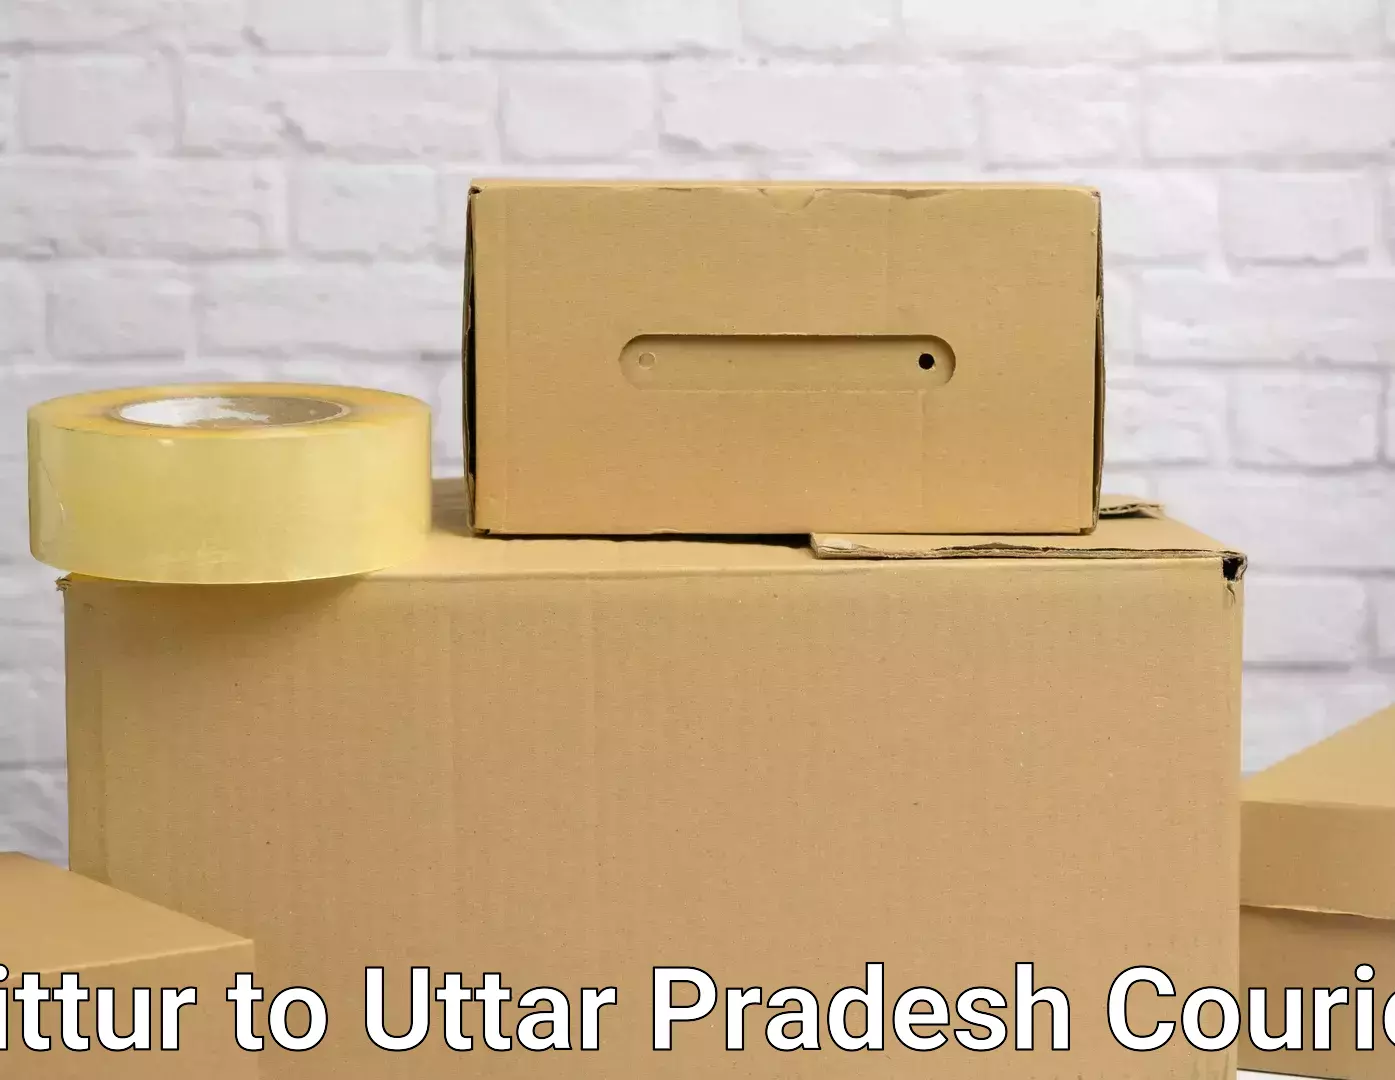 Moving and handling services Kittur to Bhadohi